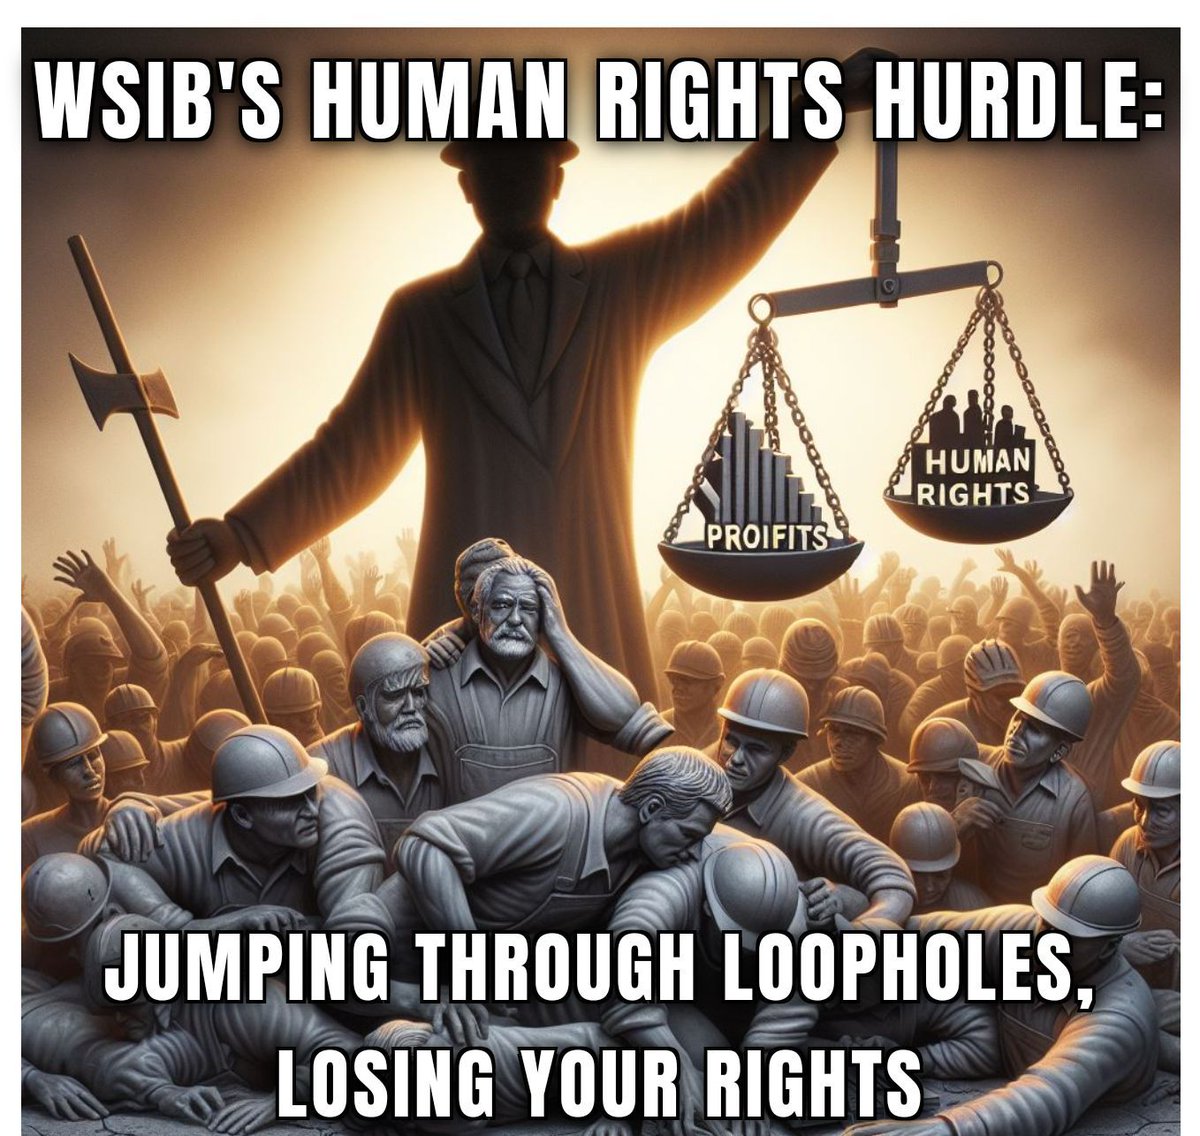 WSIB's human rights hurdles: jumping through loopholes, losing your rights. Let's break down these barriers and ensure fair treatment for all workers! #WorkersCompIsARight #InjuredWorkers #FairTreatment